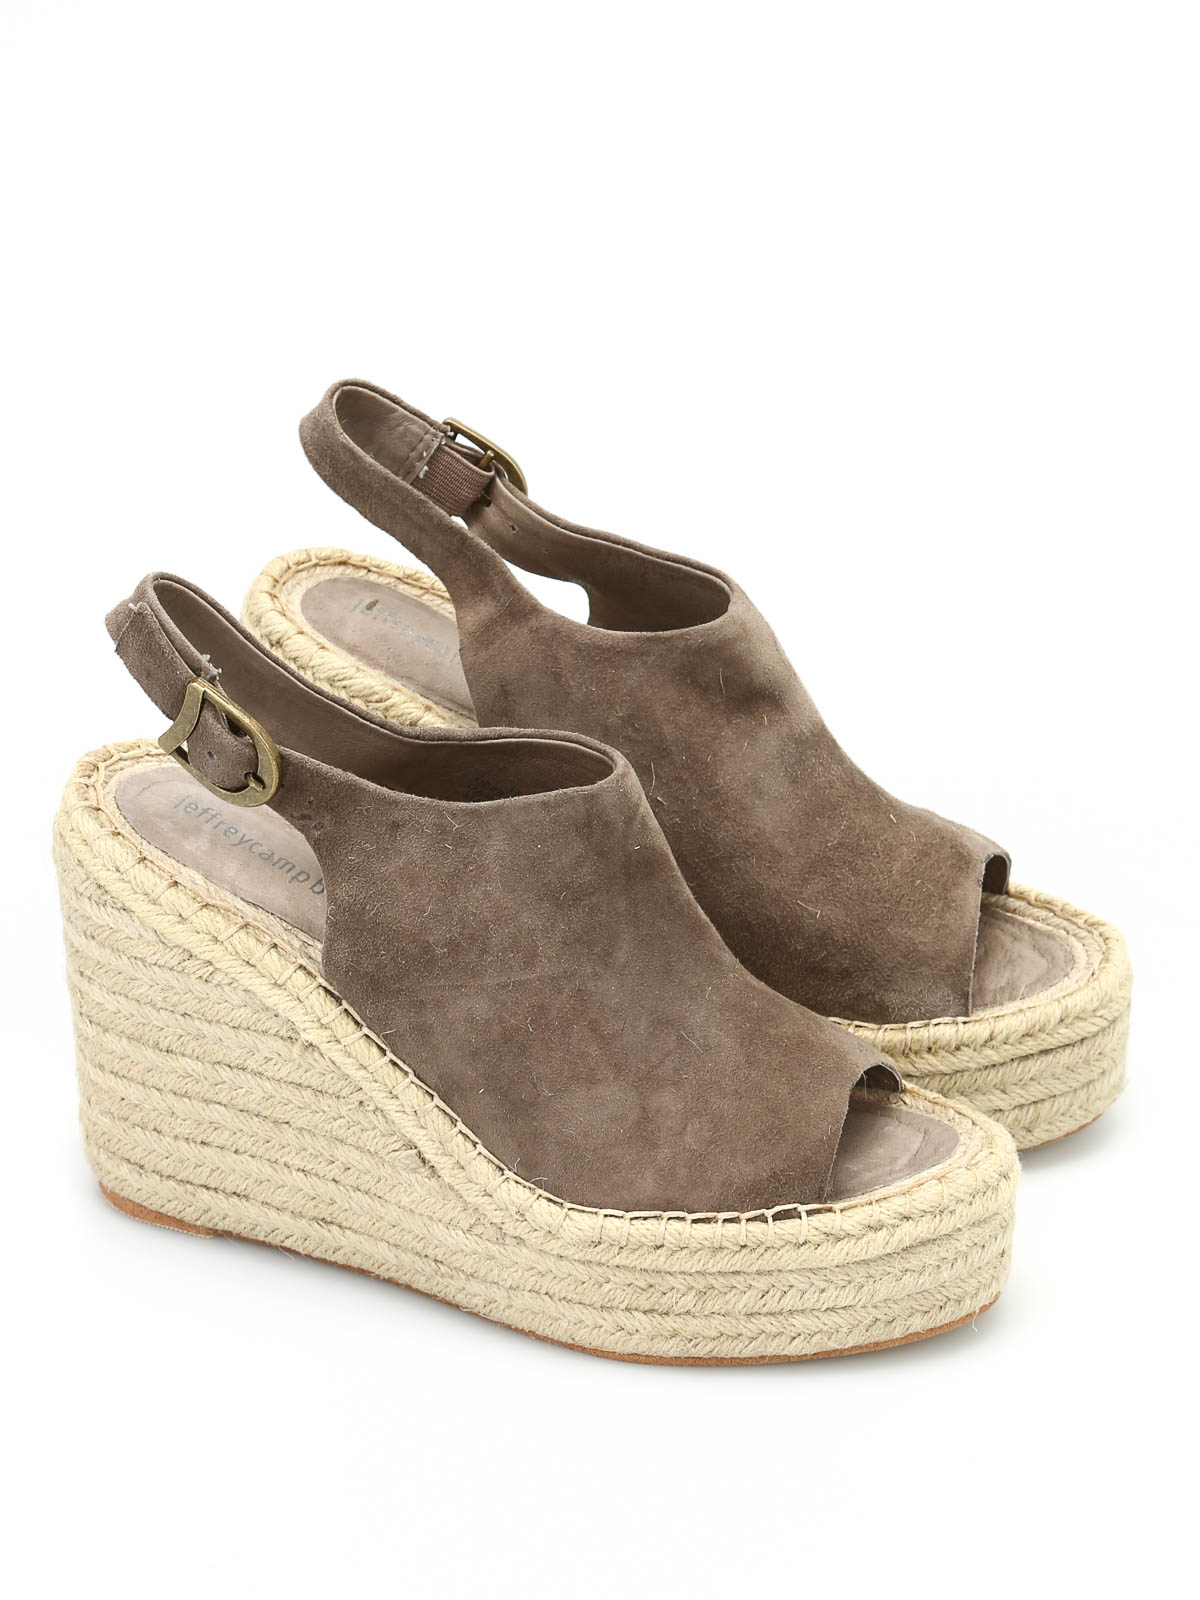 Jeffrey Campbell - Isles suede wedges 